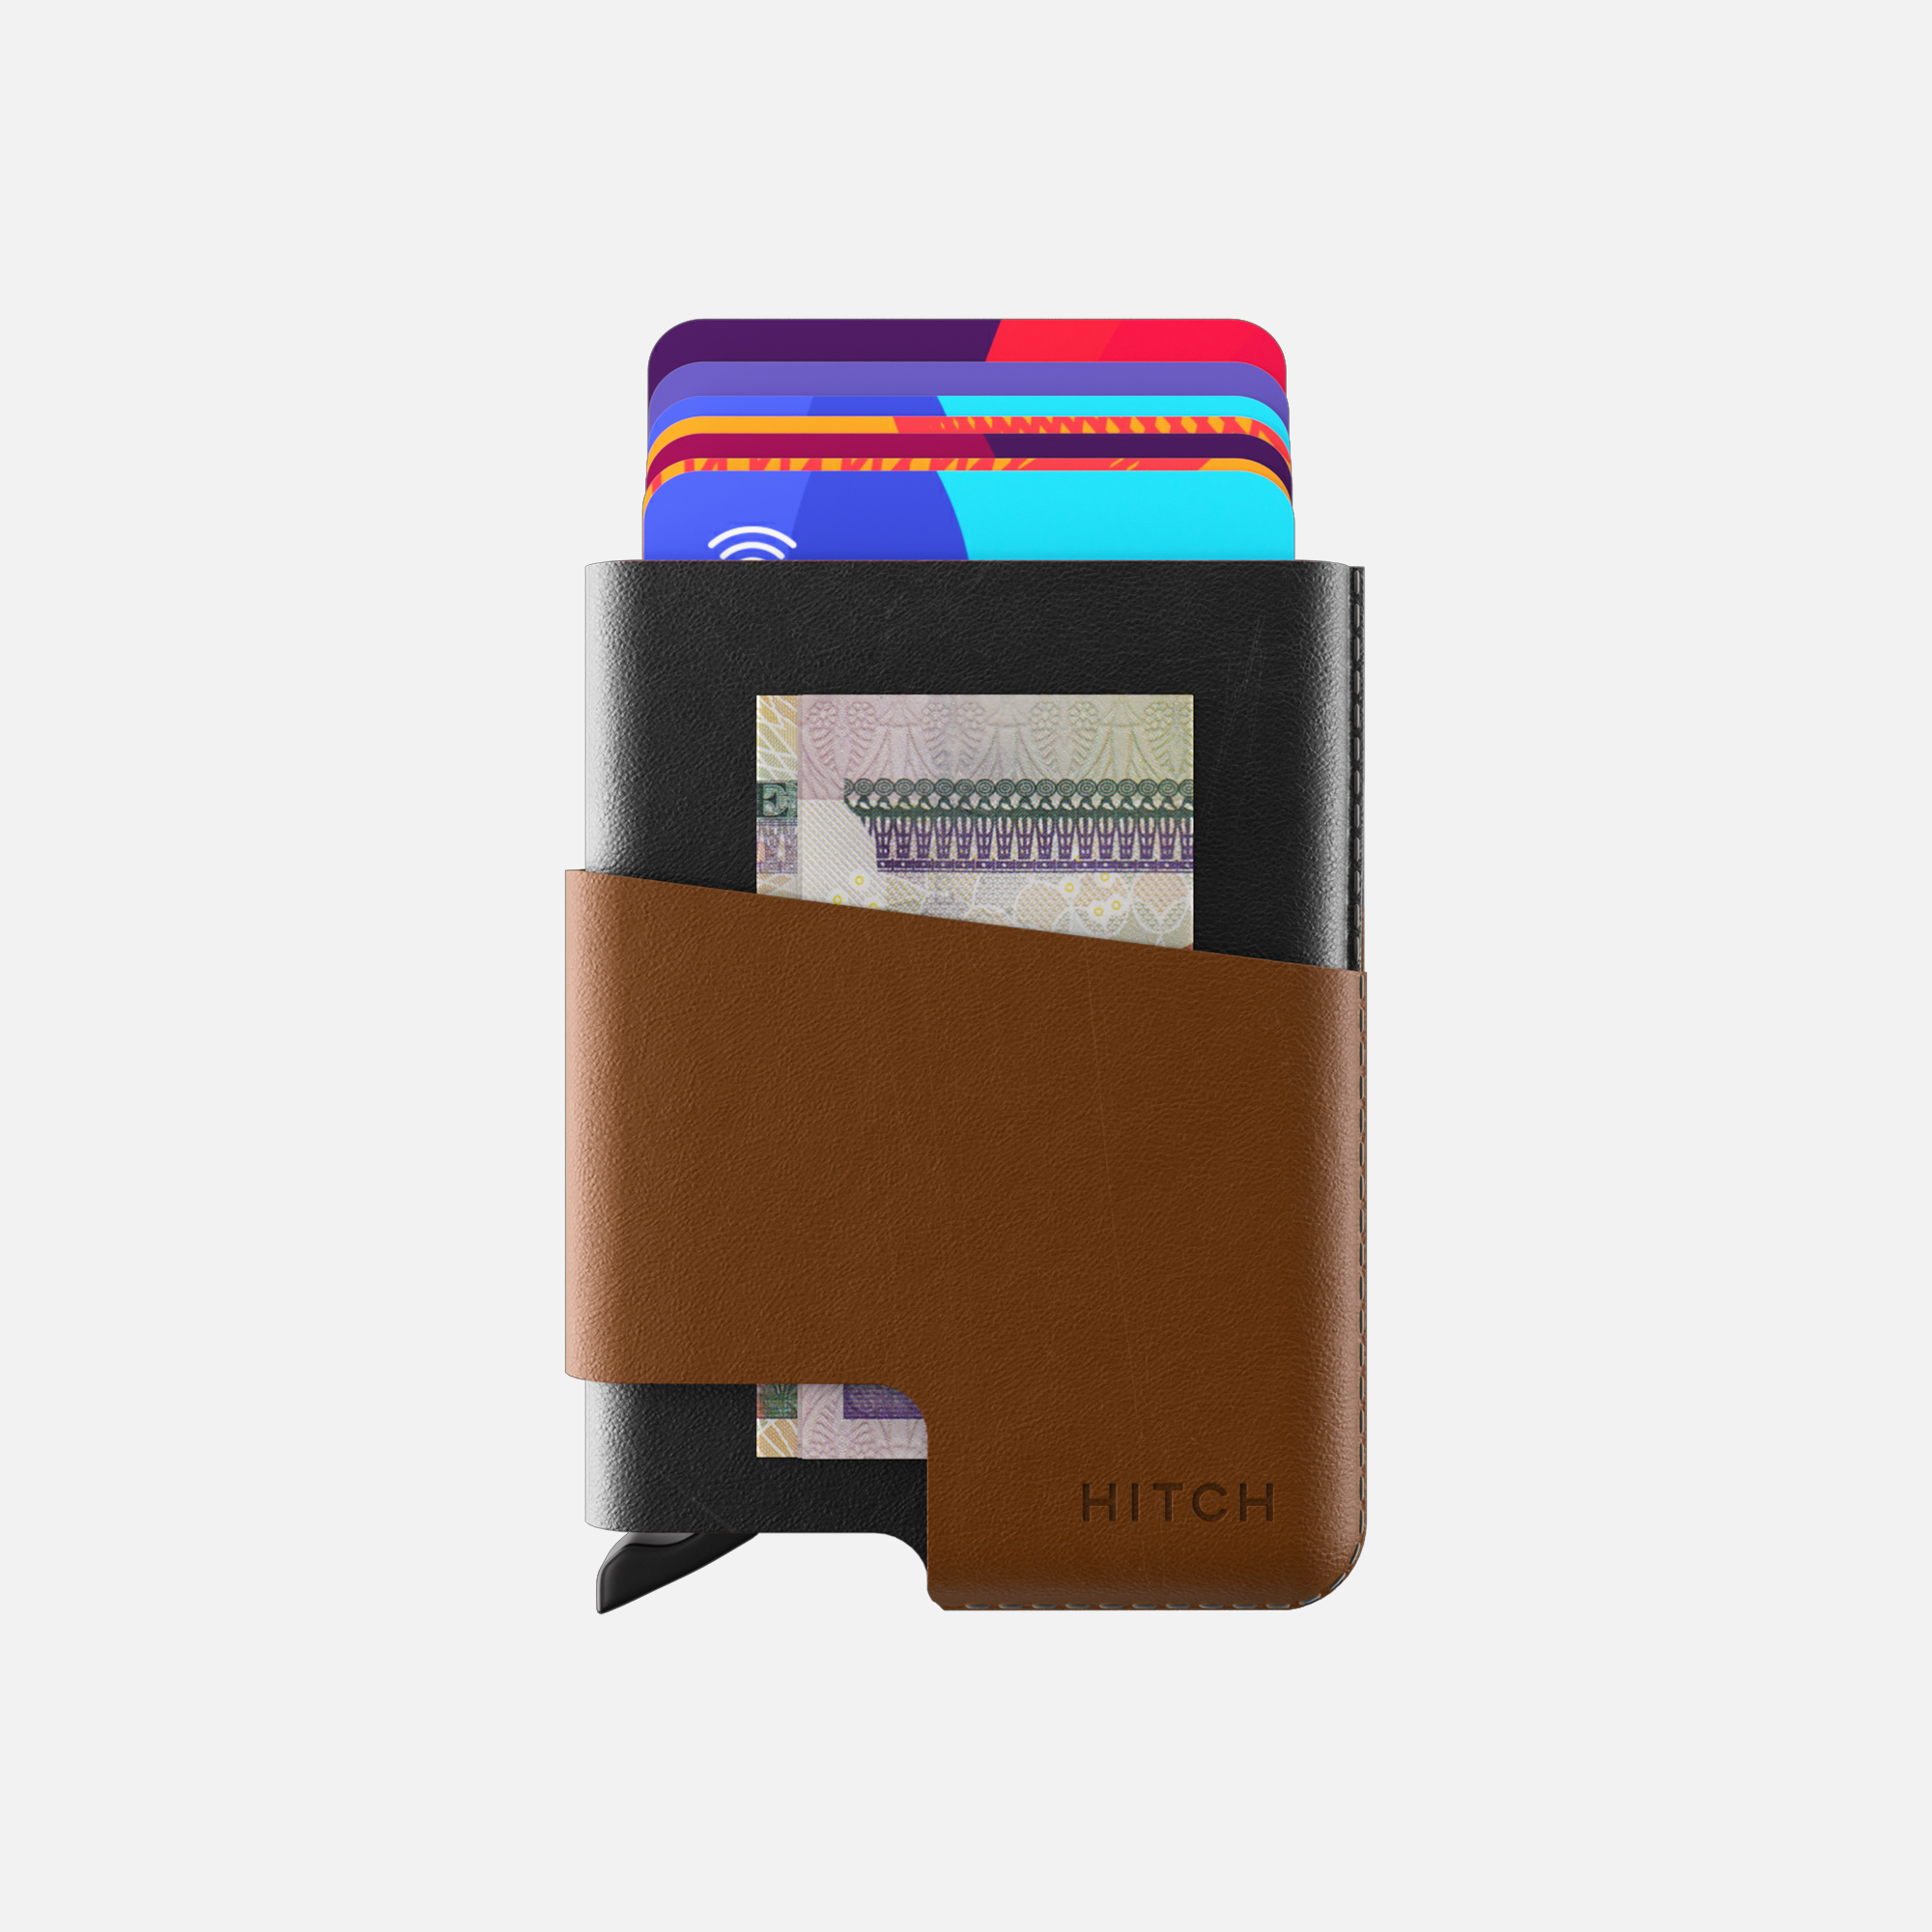 Brown and black minimalist leather cardholder wallet with credit cards and cash visible.